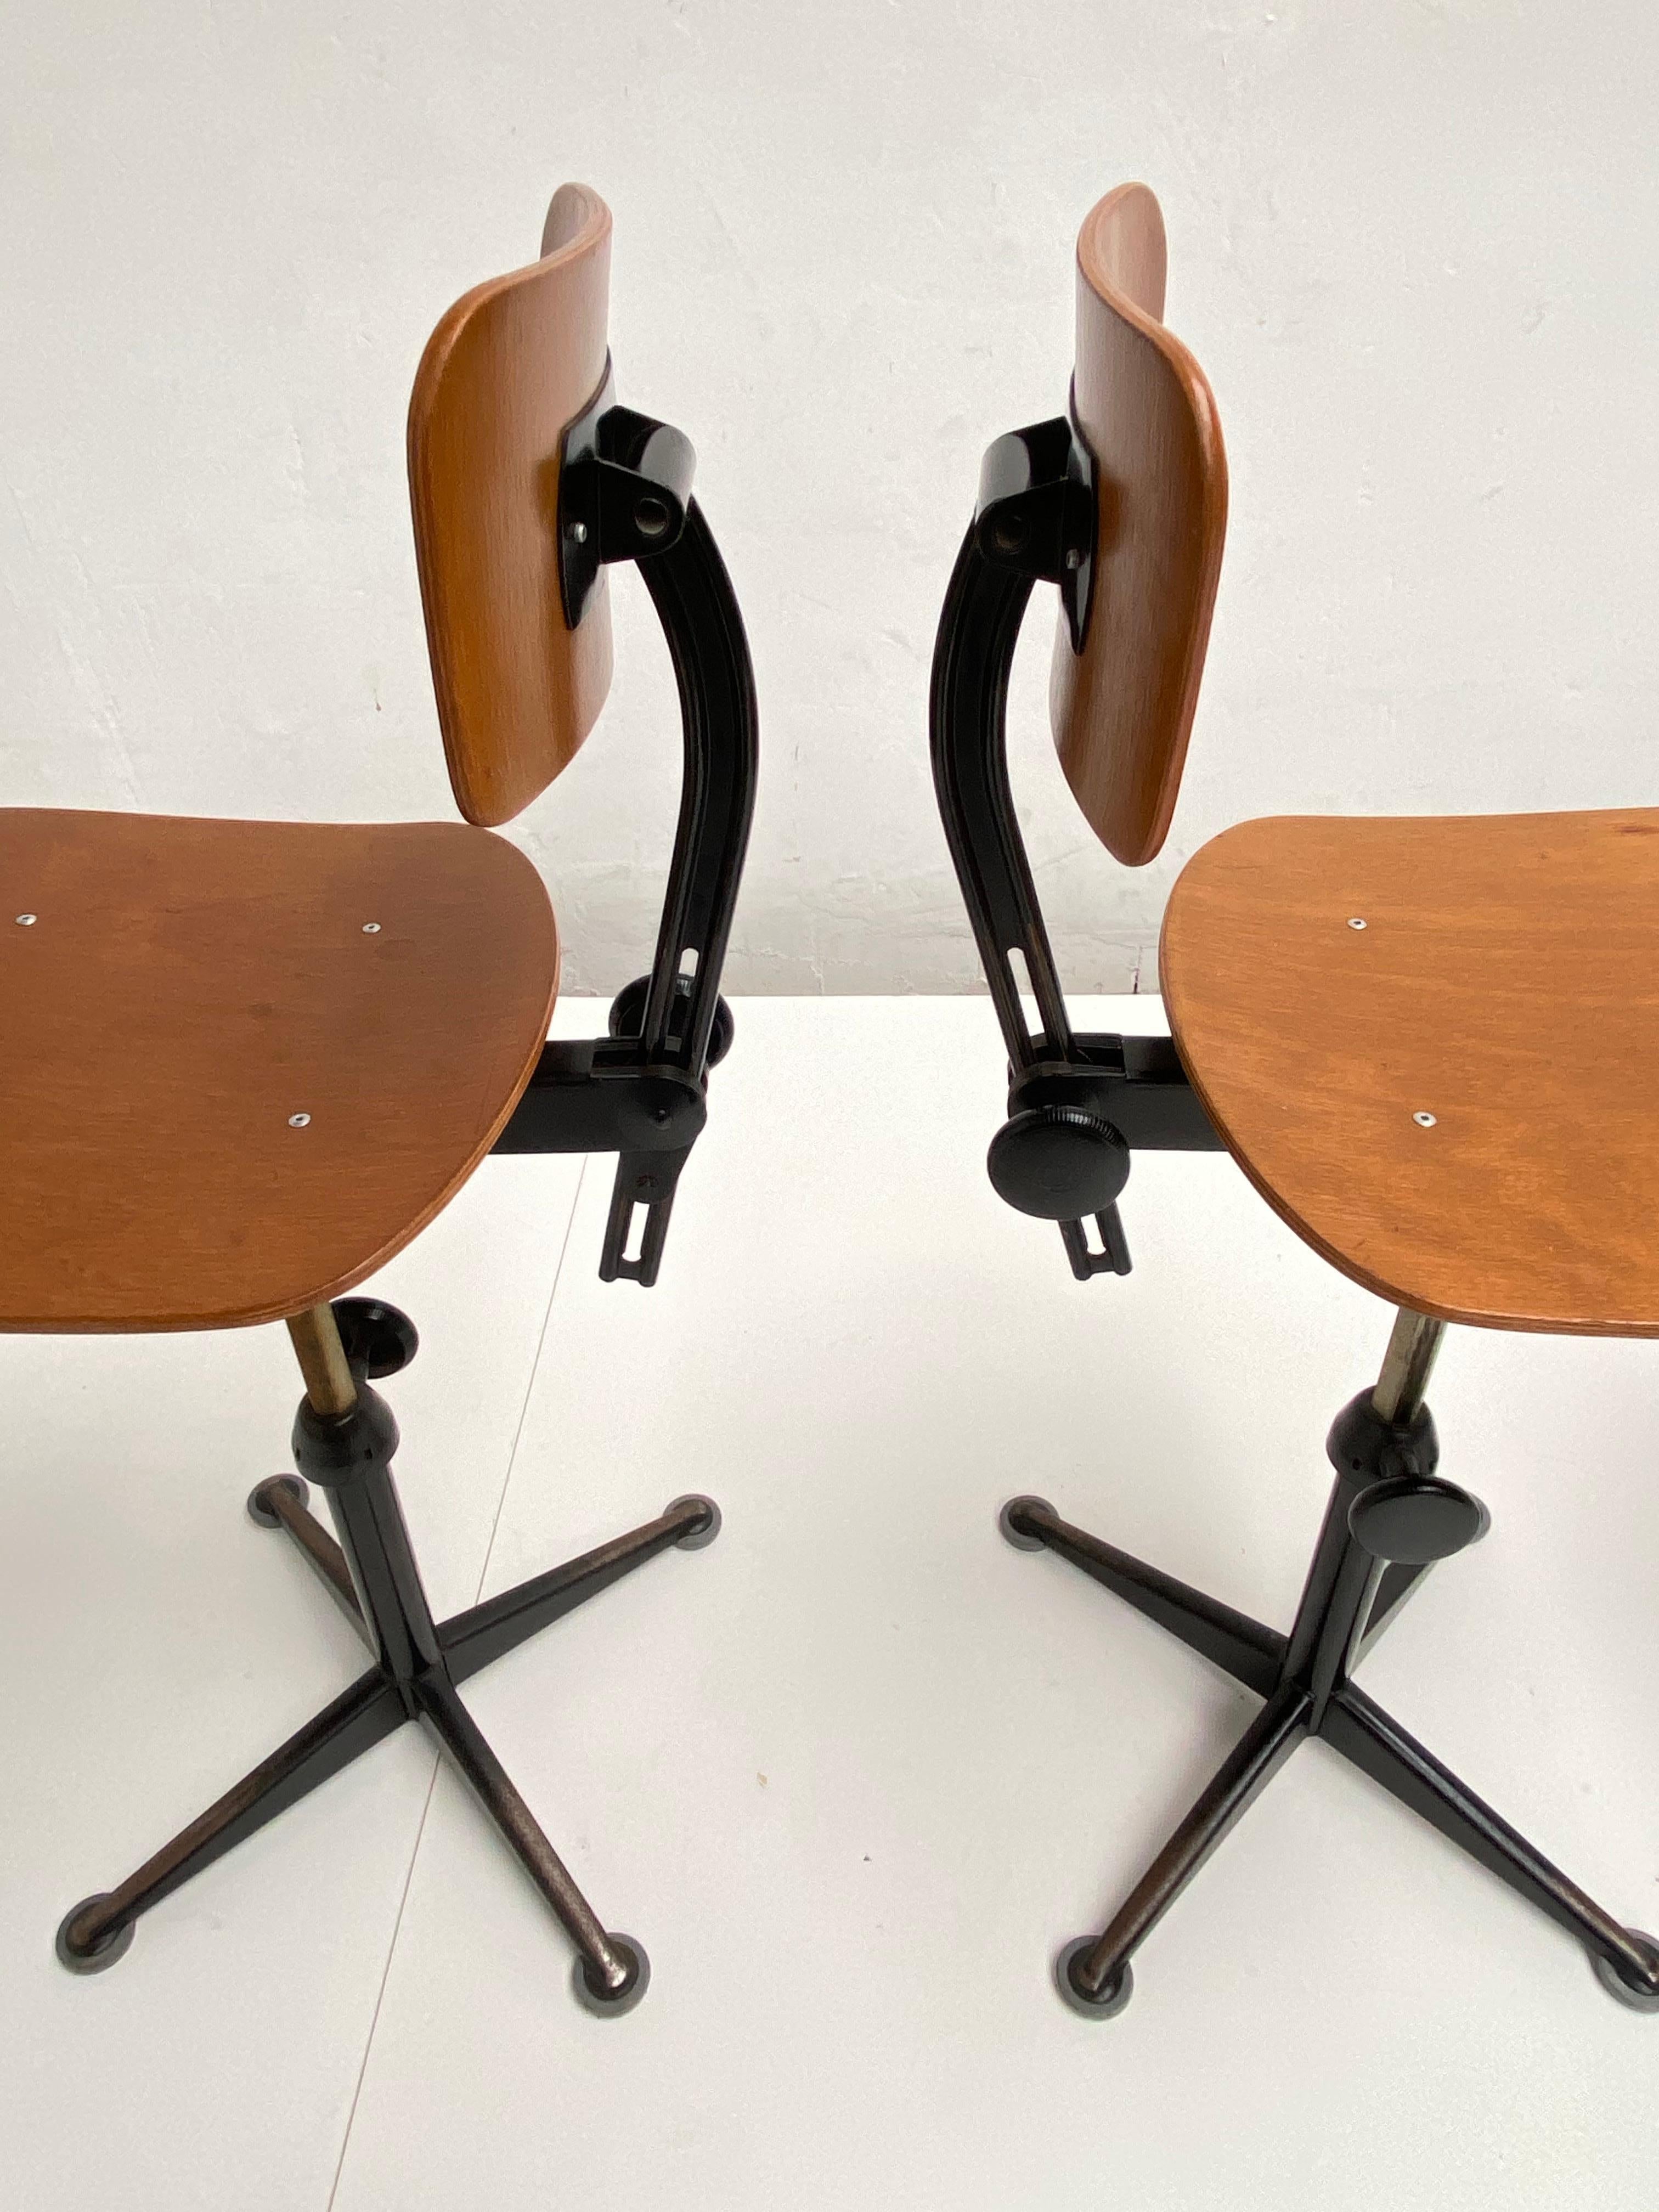 A hard to find matching set of 4 drafting and swivelling University working stools by Dutch industrial designer Friso Kramer for Ahrend De Cirkel, designed in 1960

The black enamelled version is not easy to find and only a few universities in